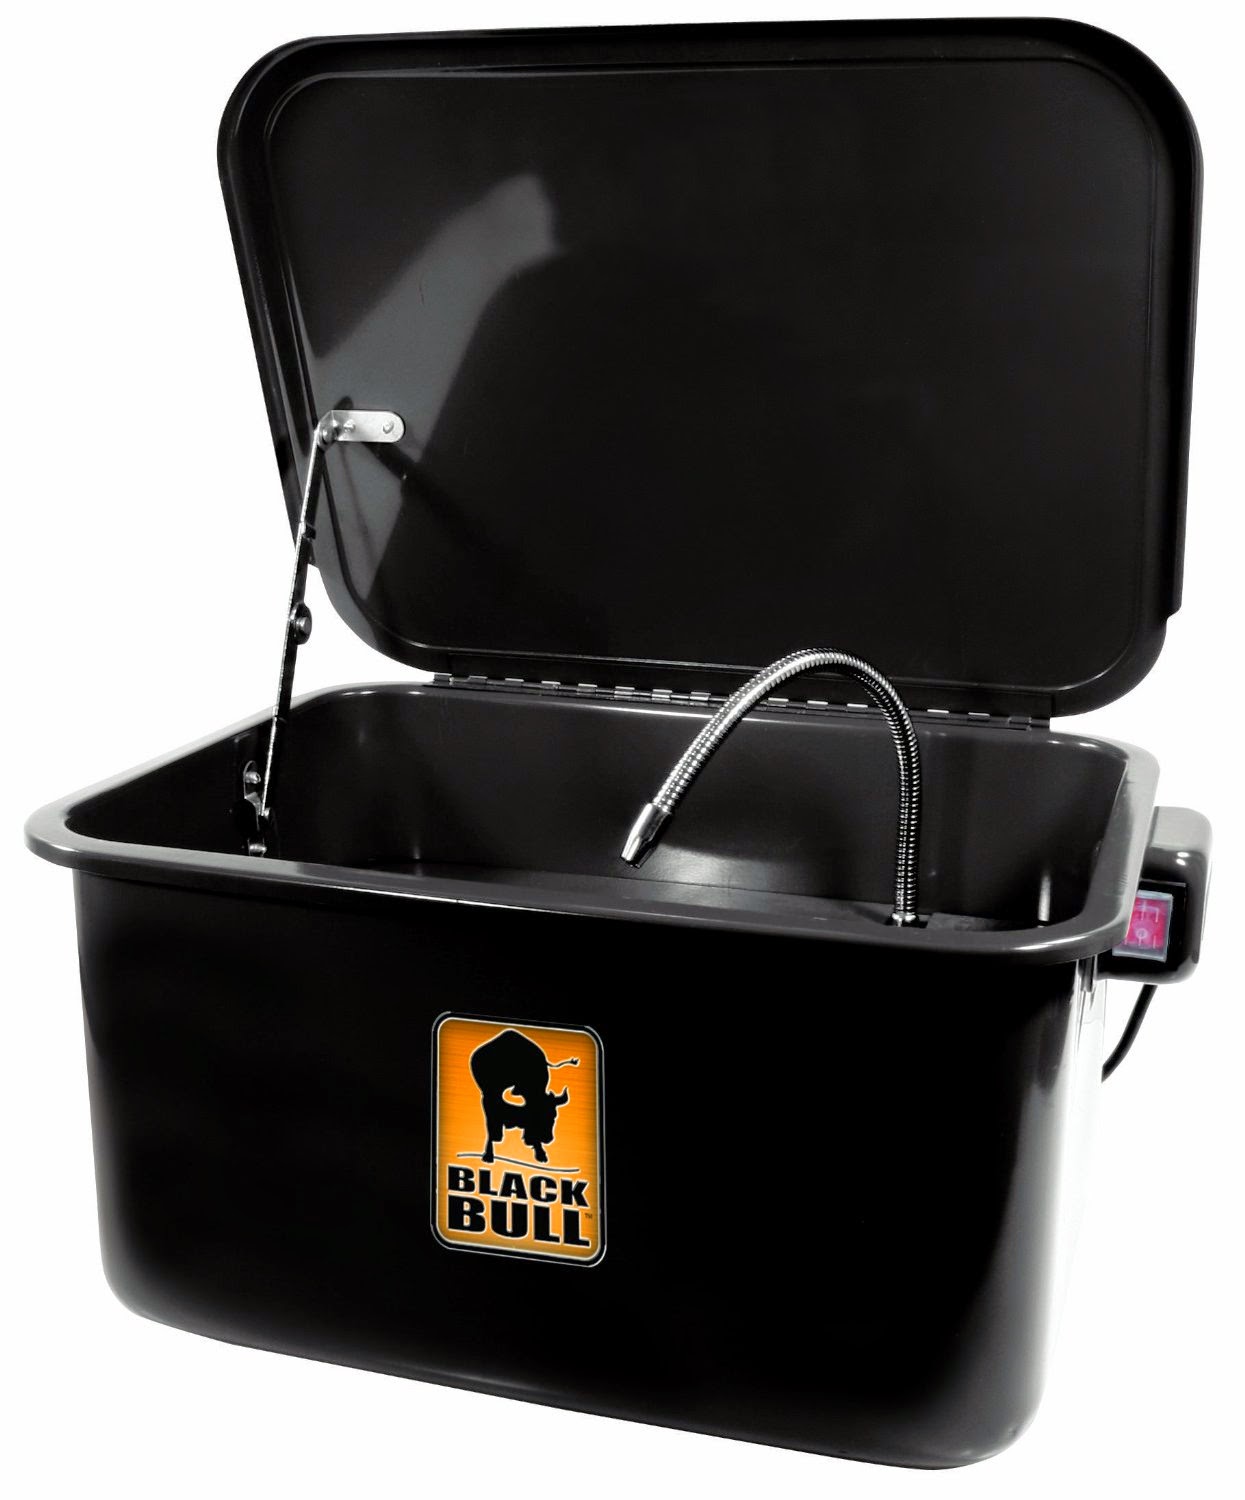 Black Bull PWASH35 Automotive Parts Cleaner Washer with 3.5 Gallon Capacity